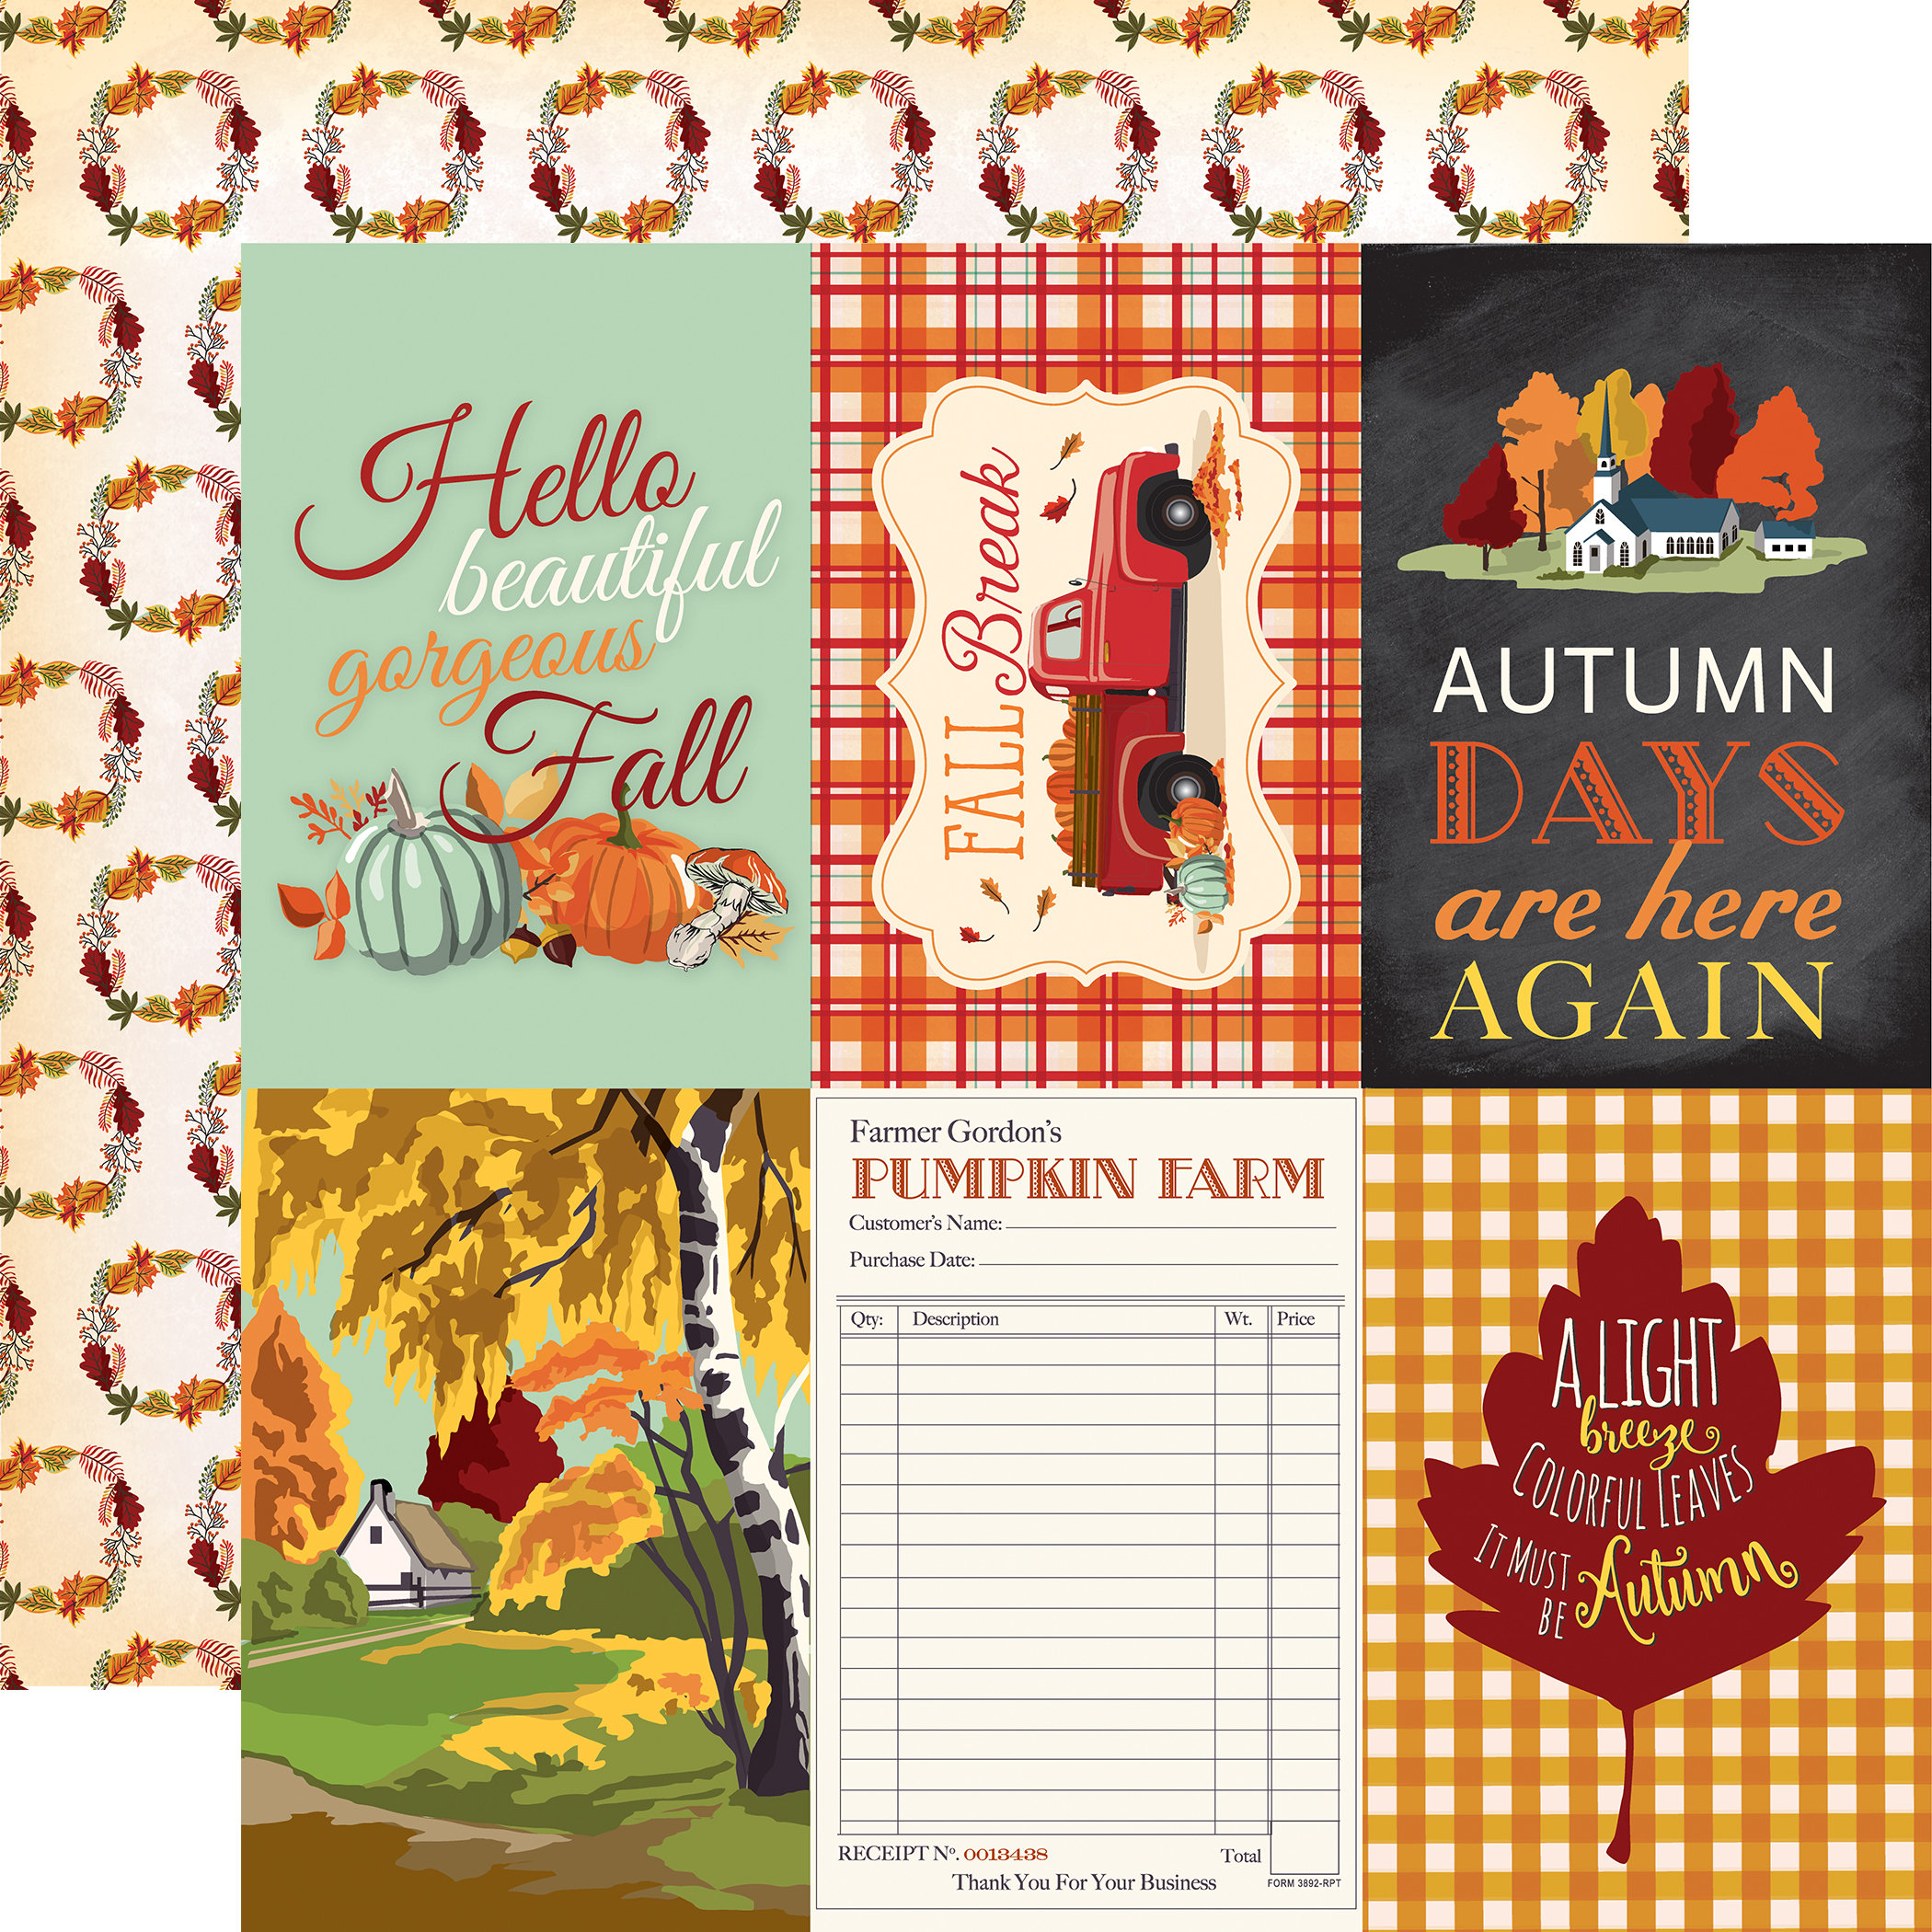 Carta Bella Paper Co. FALL Break Collection Kit, Twelve 12X12 Double-sided  Sheets and 12X12 Sticker Sheet, Autumn/fall Scrap and Papercraft 